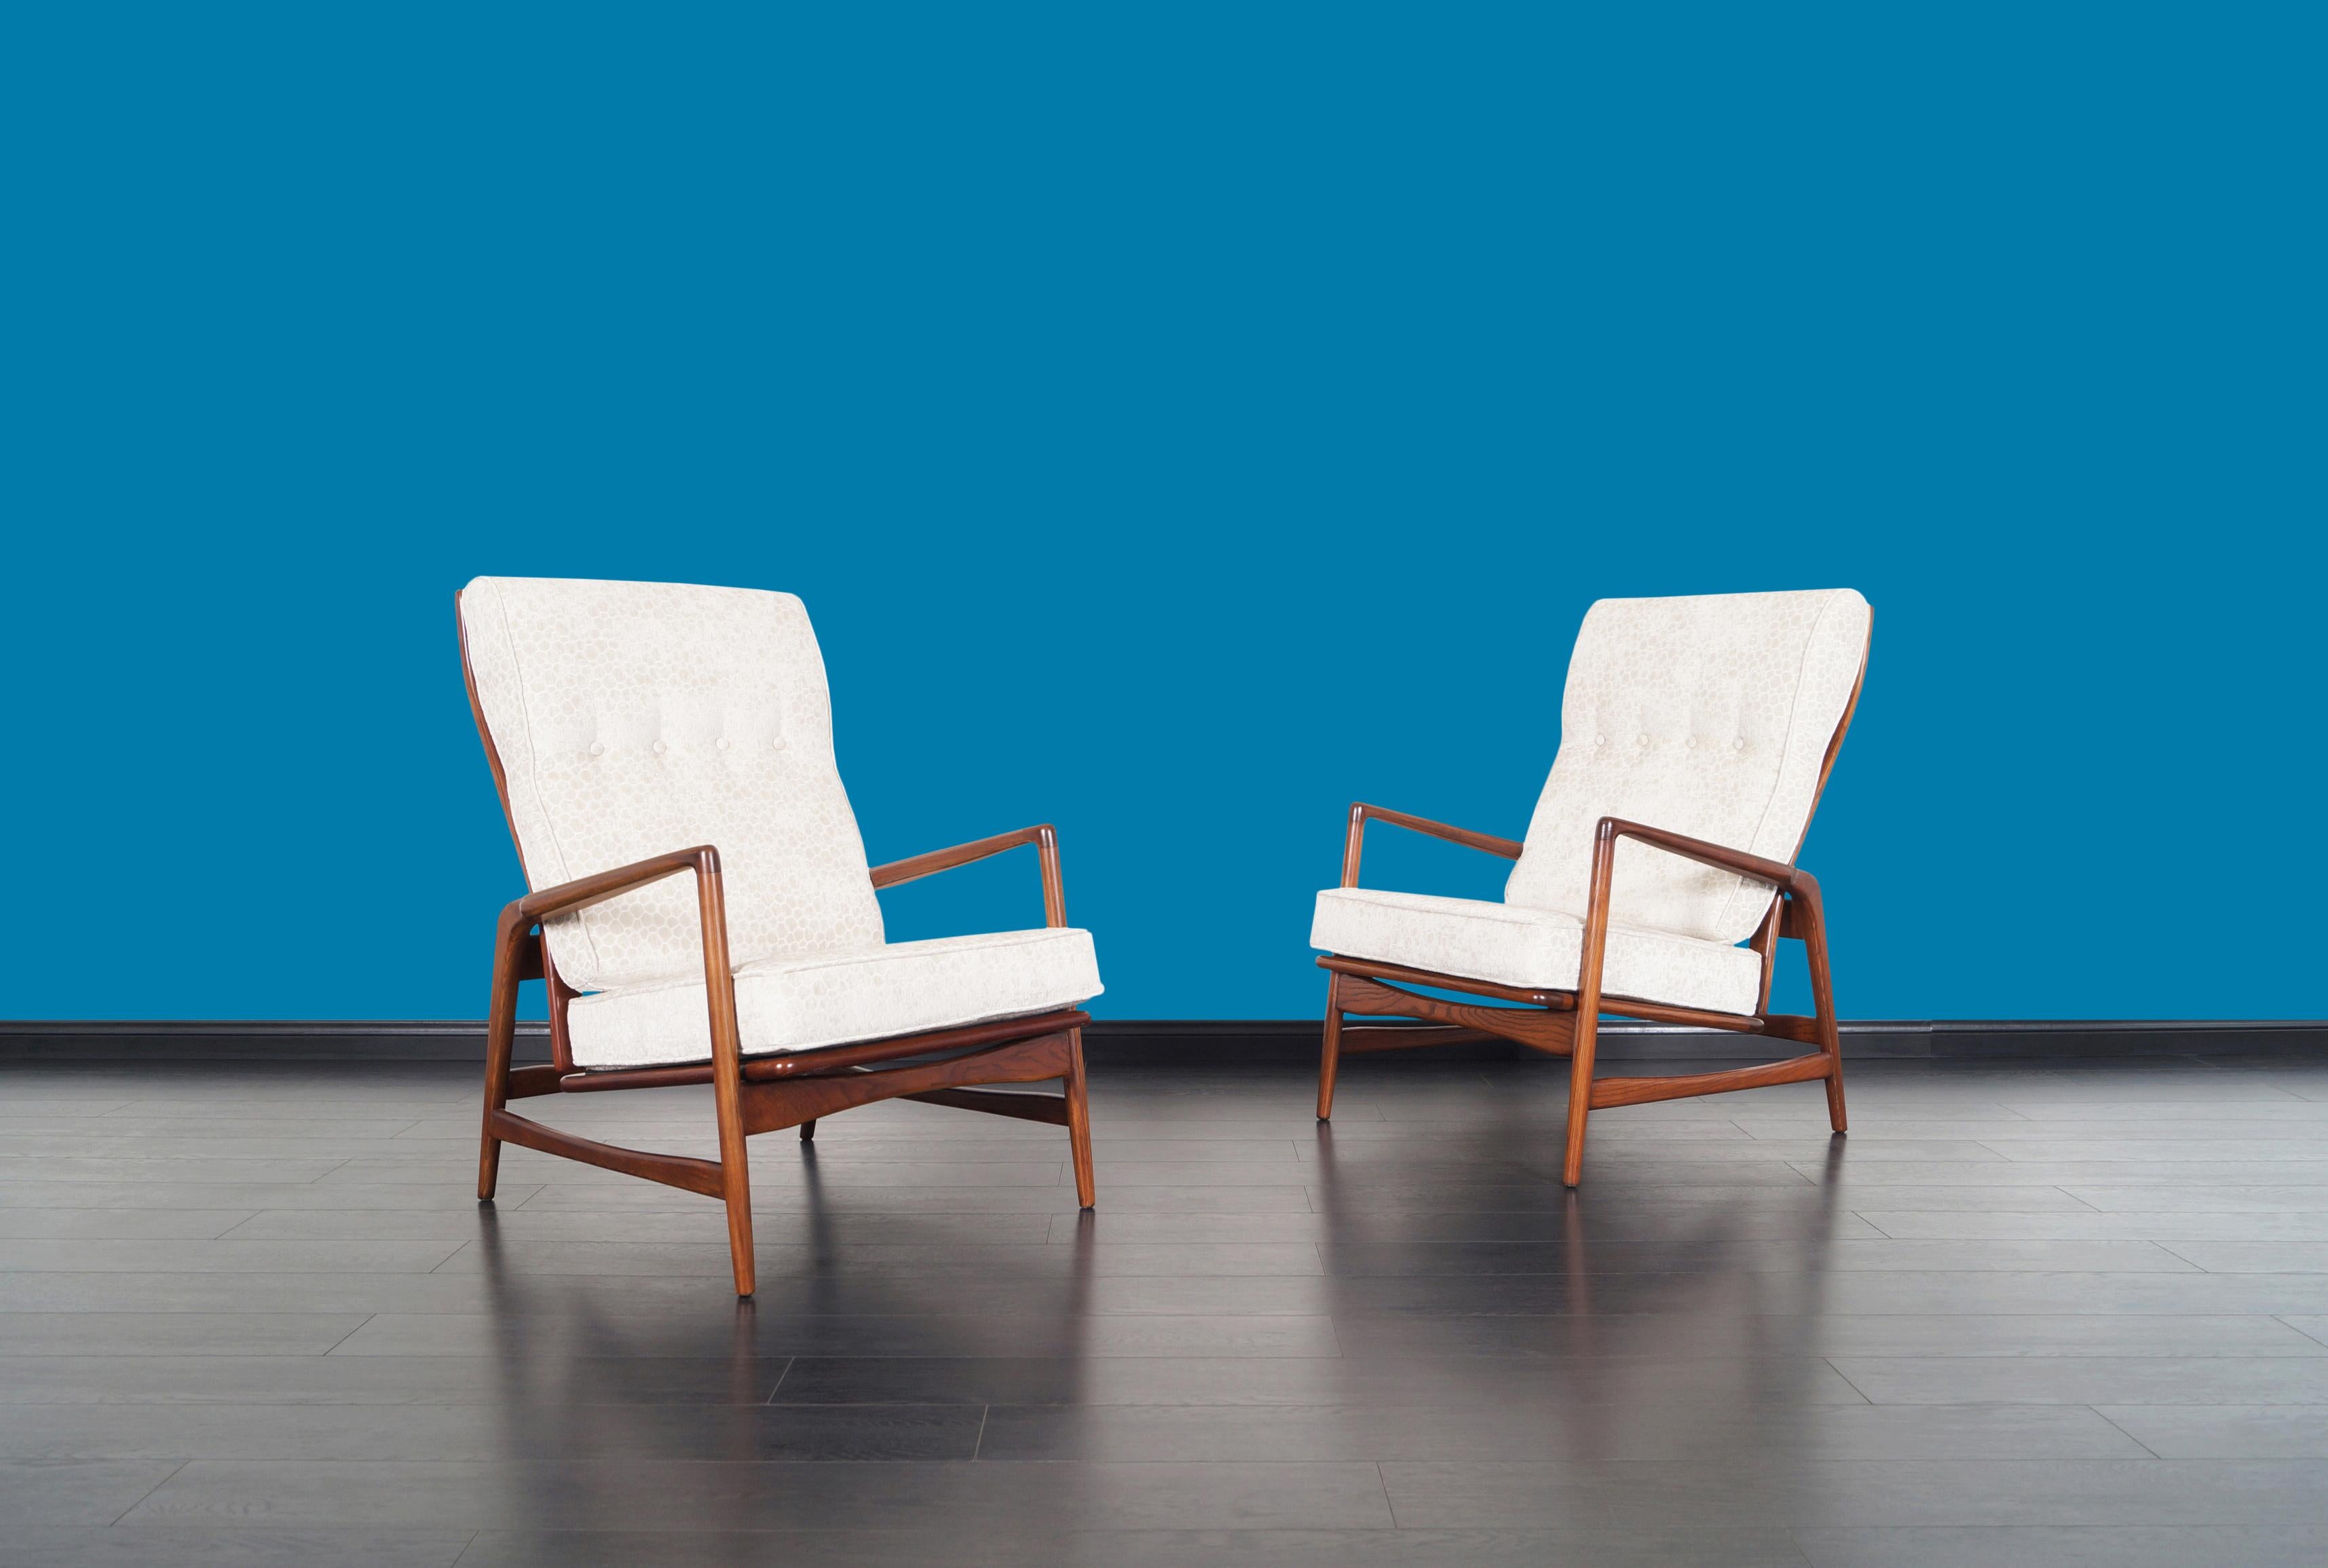 Pair of Danish high back reclining lounge chairs designed by Ib Kofod Larsen for Selig in Denmark, circa 1960s. These elegant and sculptural chairs features a solid walnut stained oak frame with sleek angled armrests. With a sculptural back, these